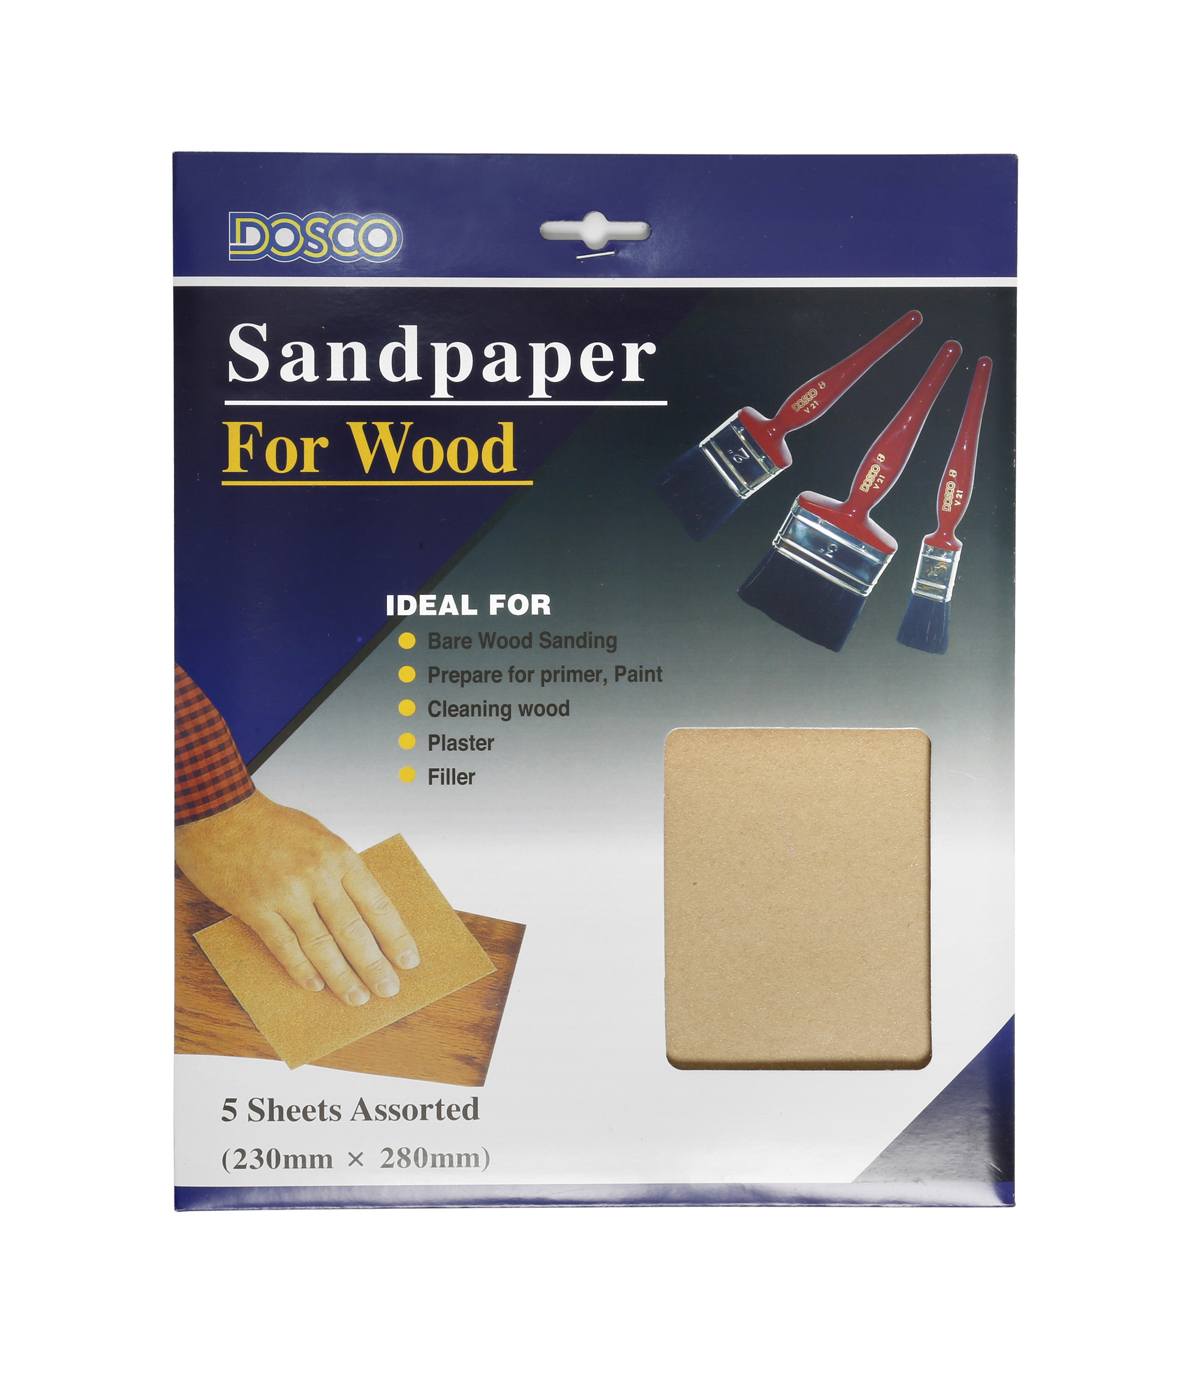 Dosco Sandpaper For Wood 5 Sheets Assorted